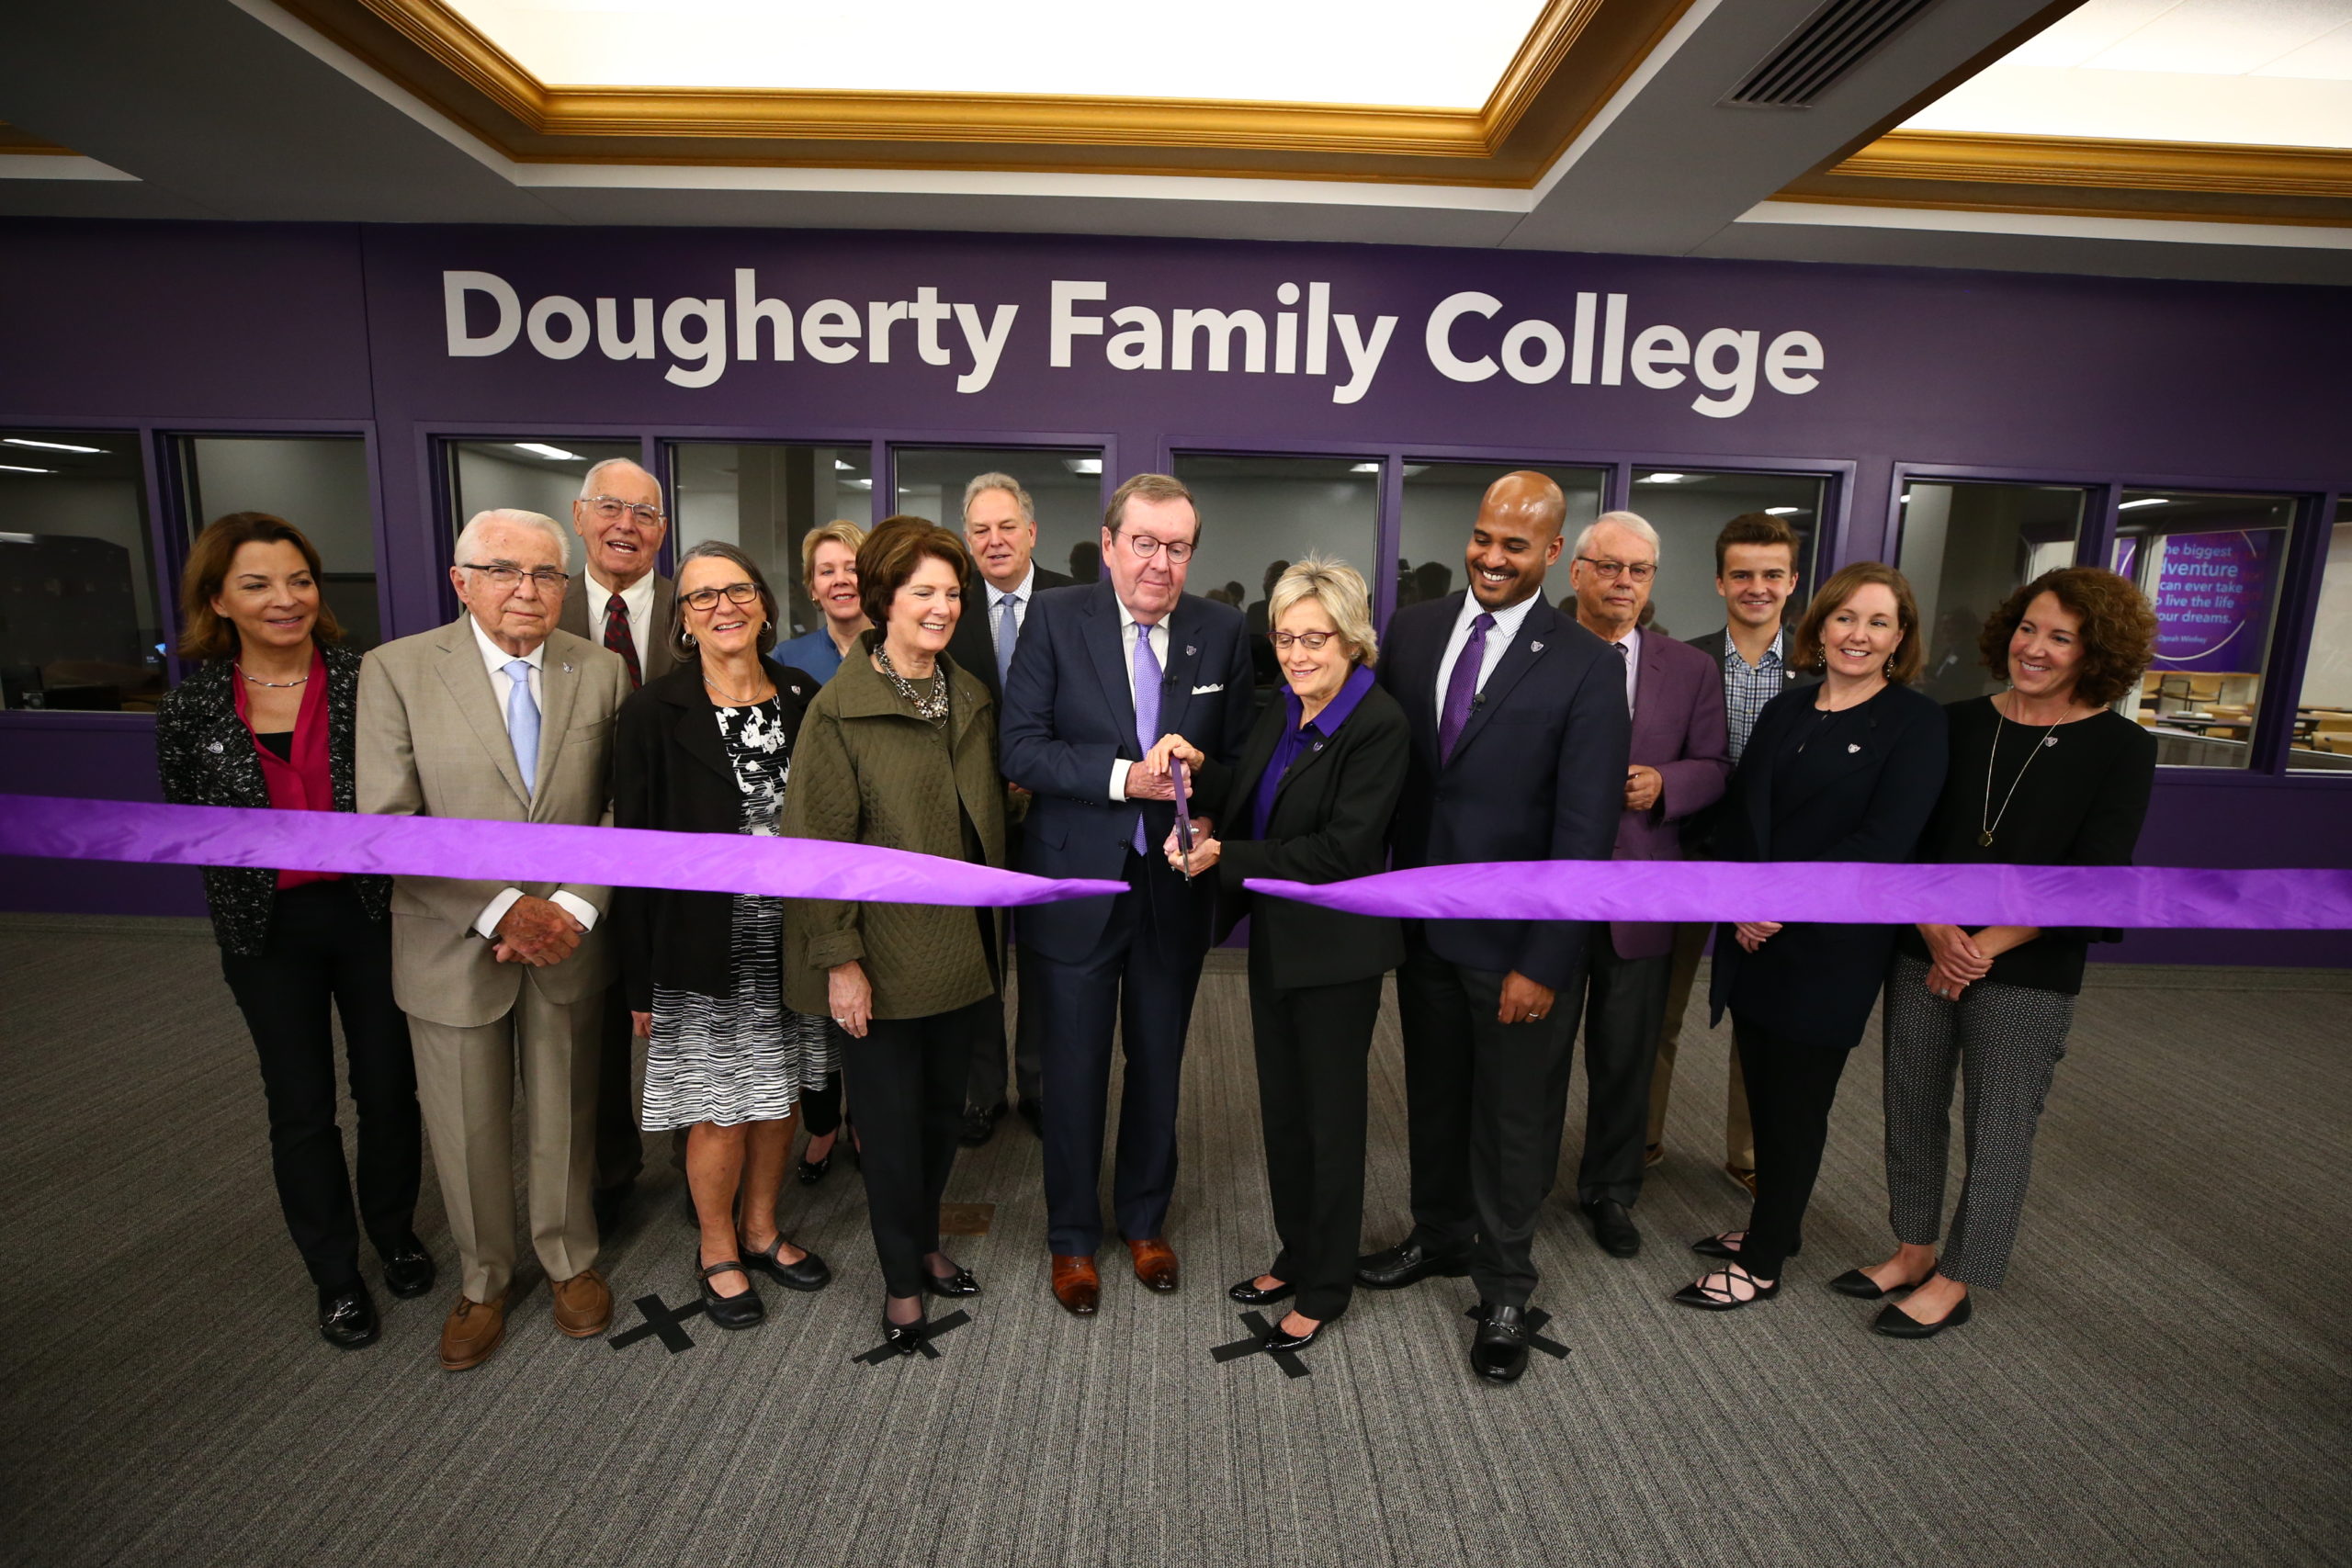 Mike Dougherty and president Julie Sullivan cut the symbolic ribbon, dedicating Dougherty Family College on Oct. 13.